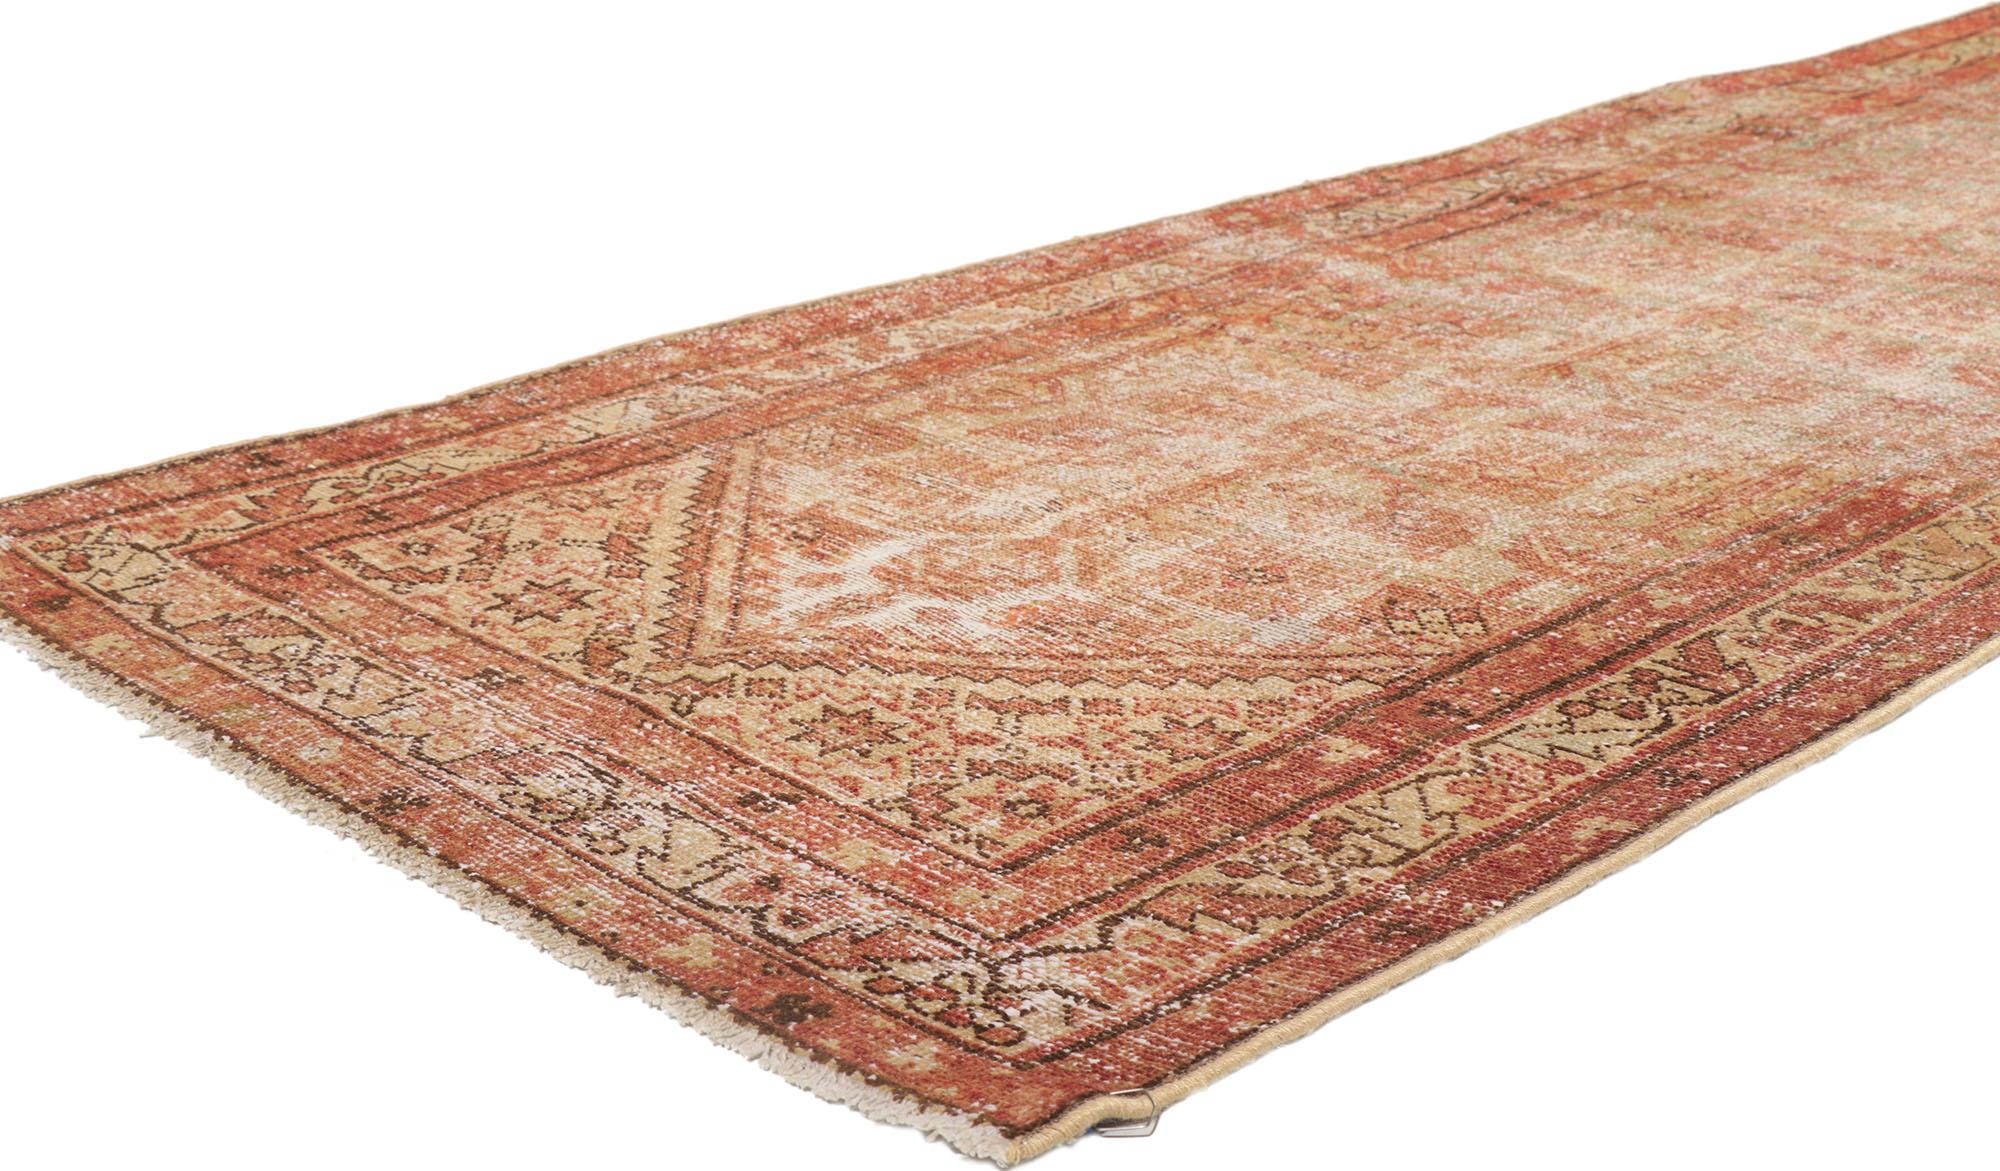 ​53736 Antique-Worn Persian Malayer Rug, 03'04 x 12'09.
Weathered finesse meets rustic sensibility in this hand knotted distressed antique-worn Persian Malayer rug. ​This distressed Persian Malayer gallery rug showcases an allover floral lattice